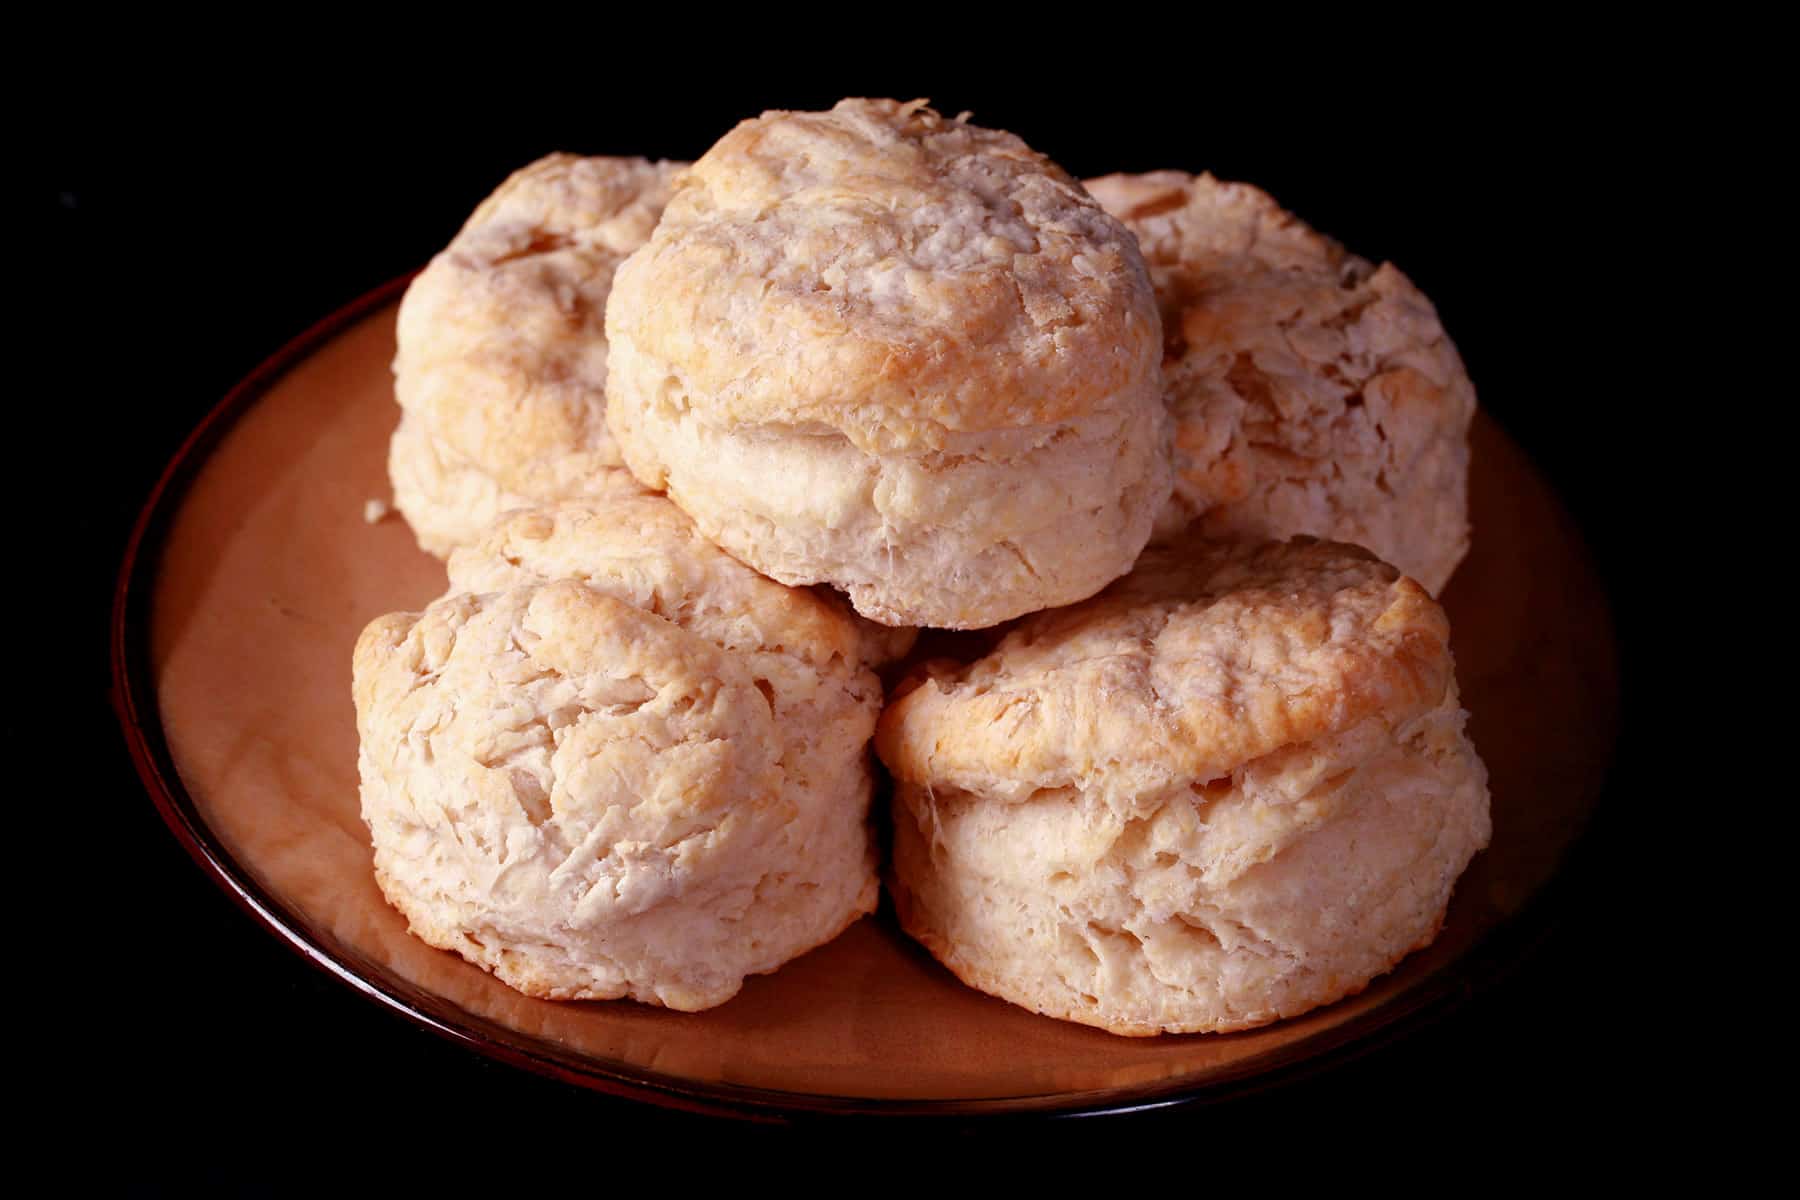 A plate of homemade baking powder biscuits.